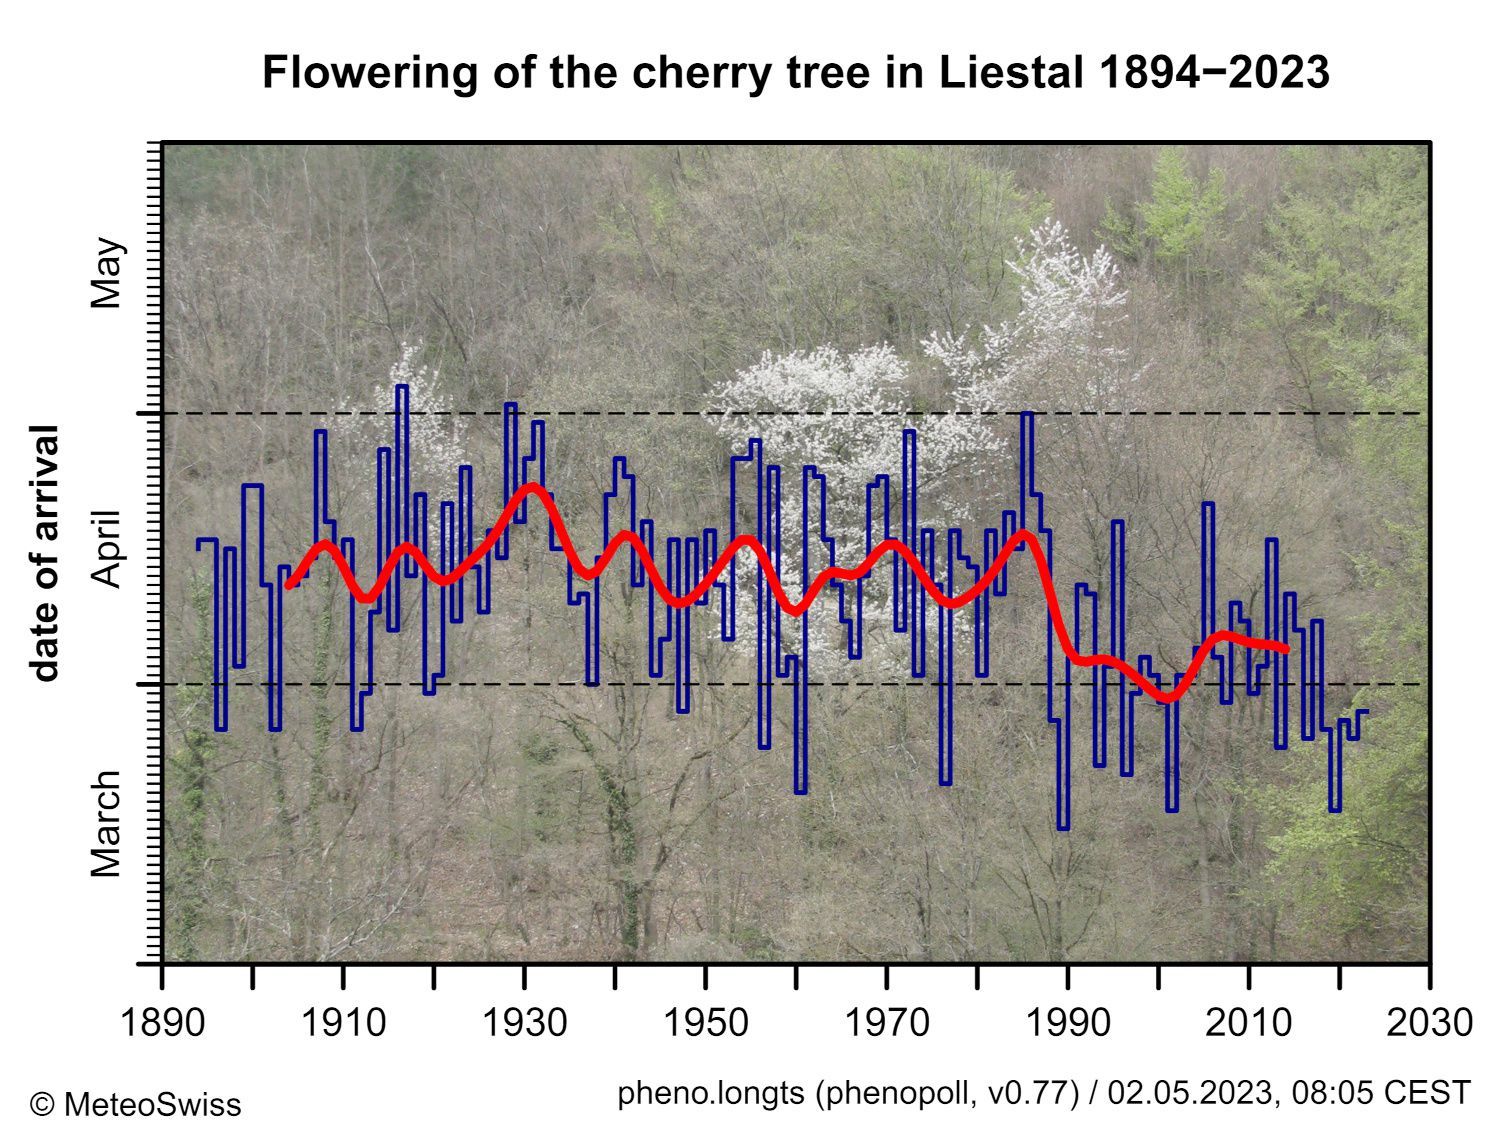 Blooming of the cherry tree in Liestal-Weideli since 1894. The red line shows the 20-year weighted average (Gaussian low-pass filter).